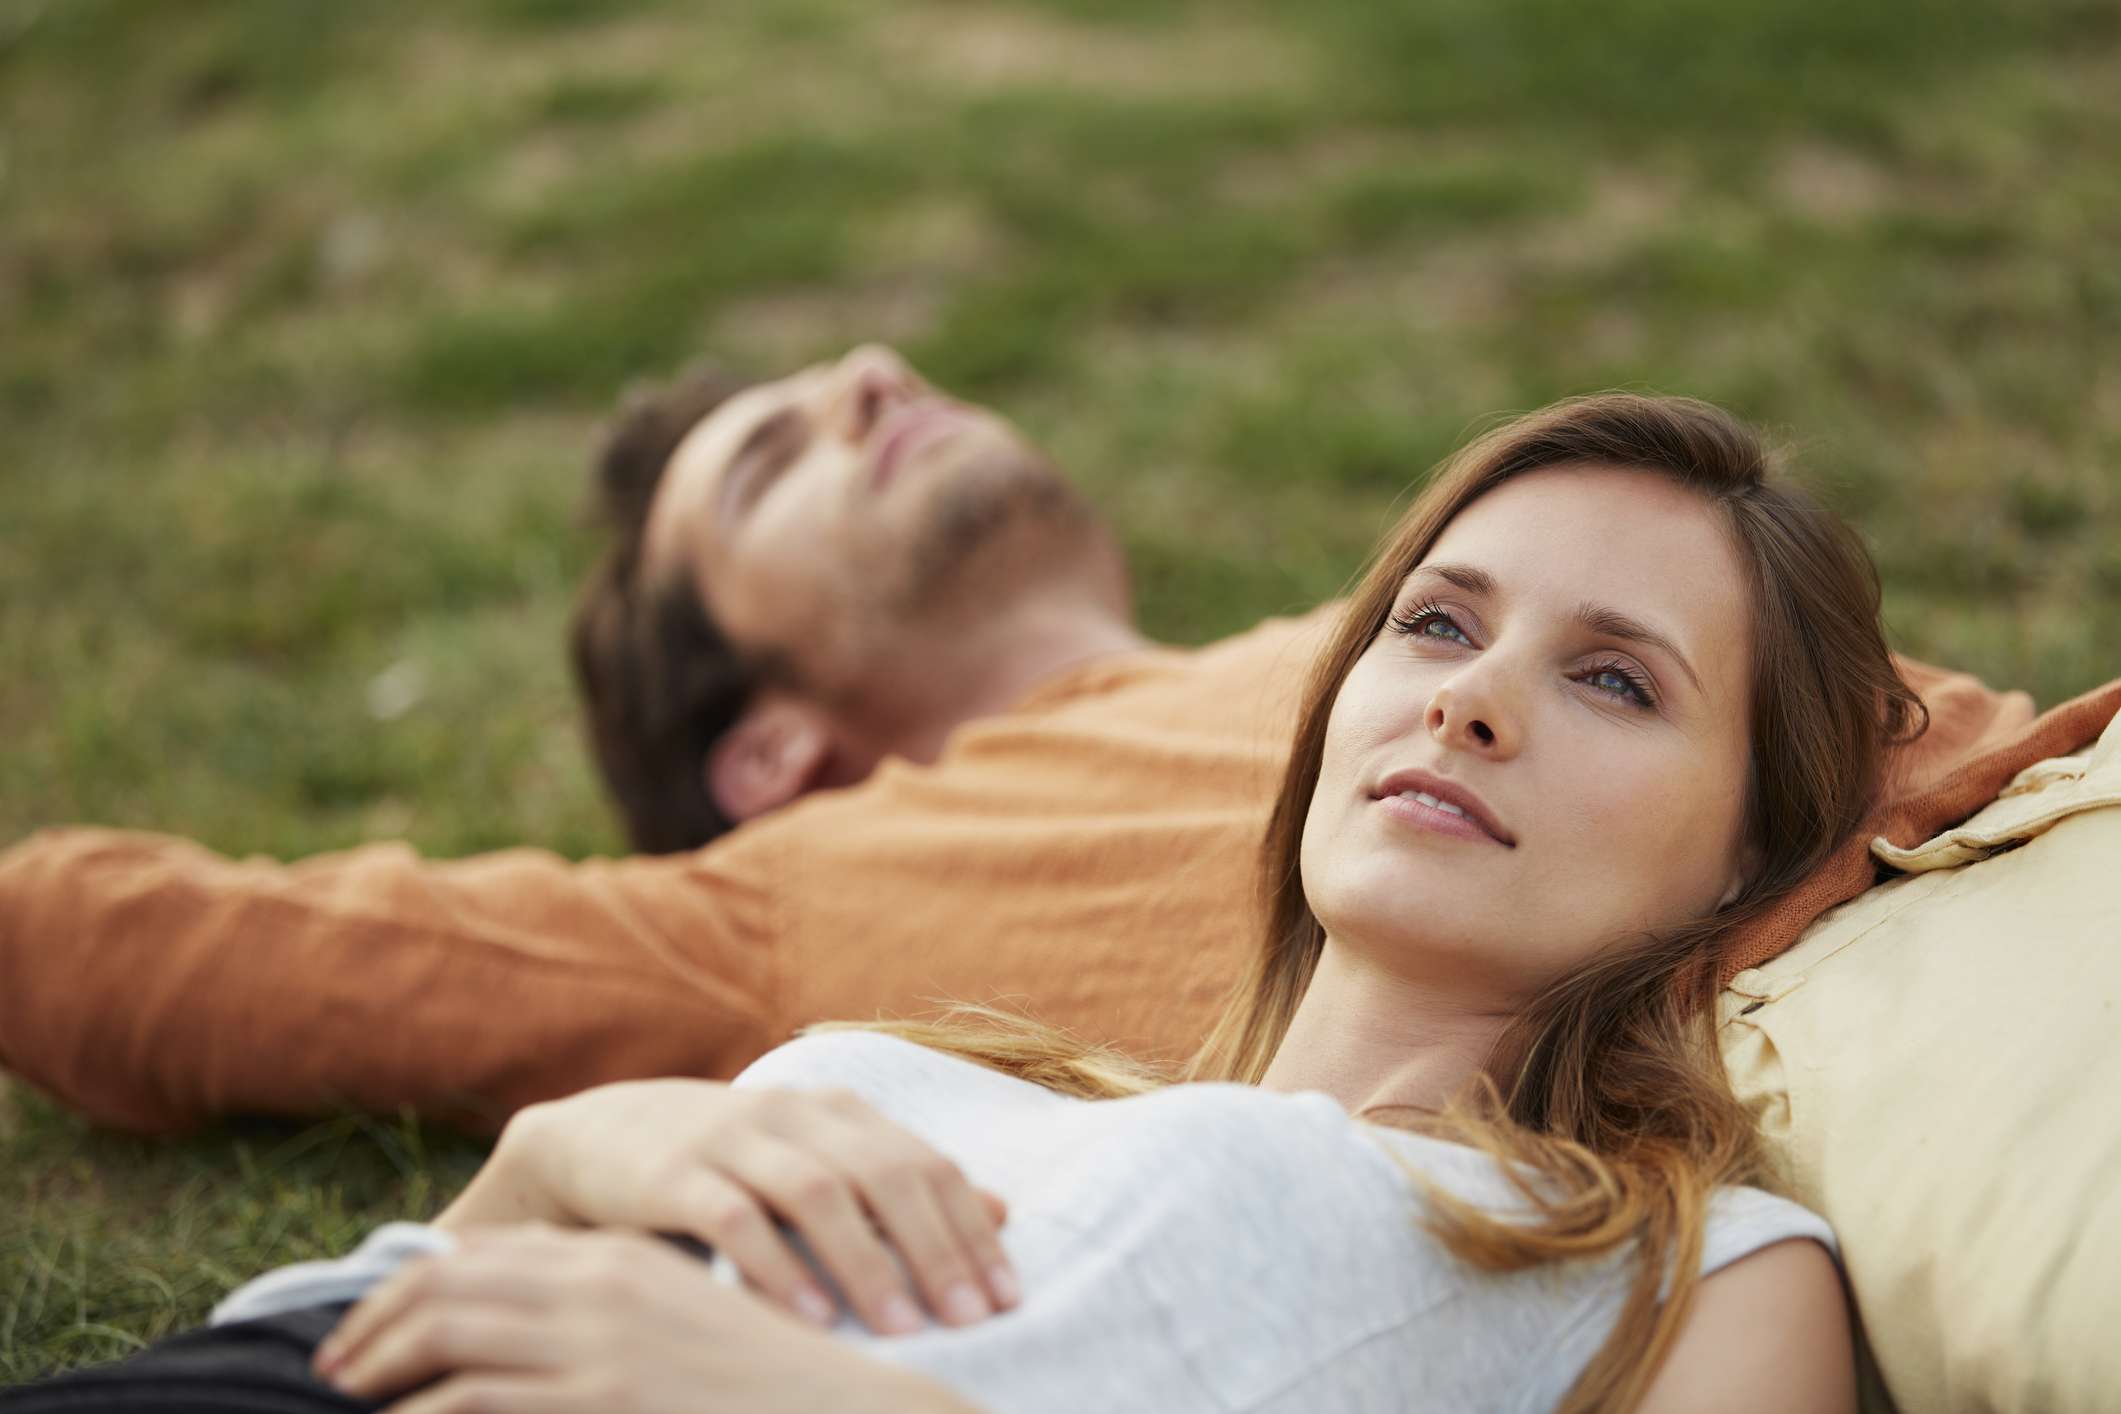 Woman resting head on man's stomach at park